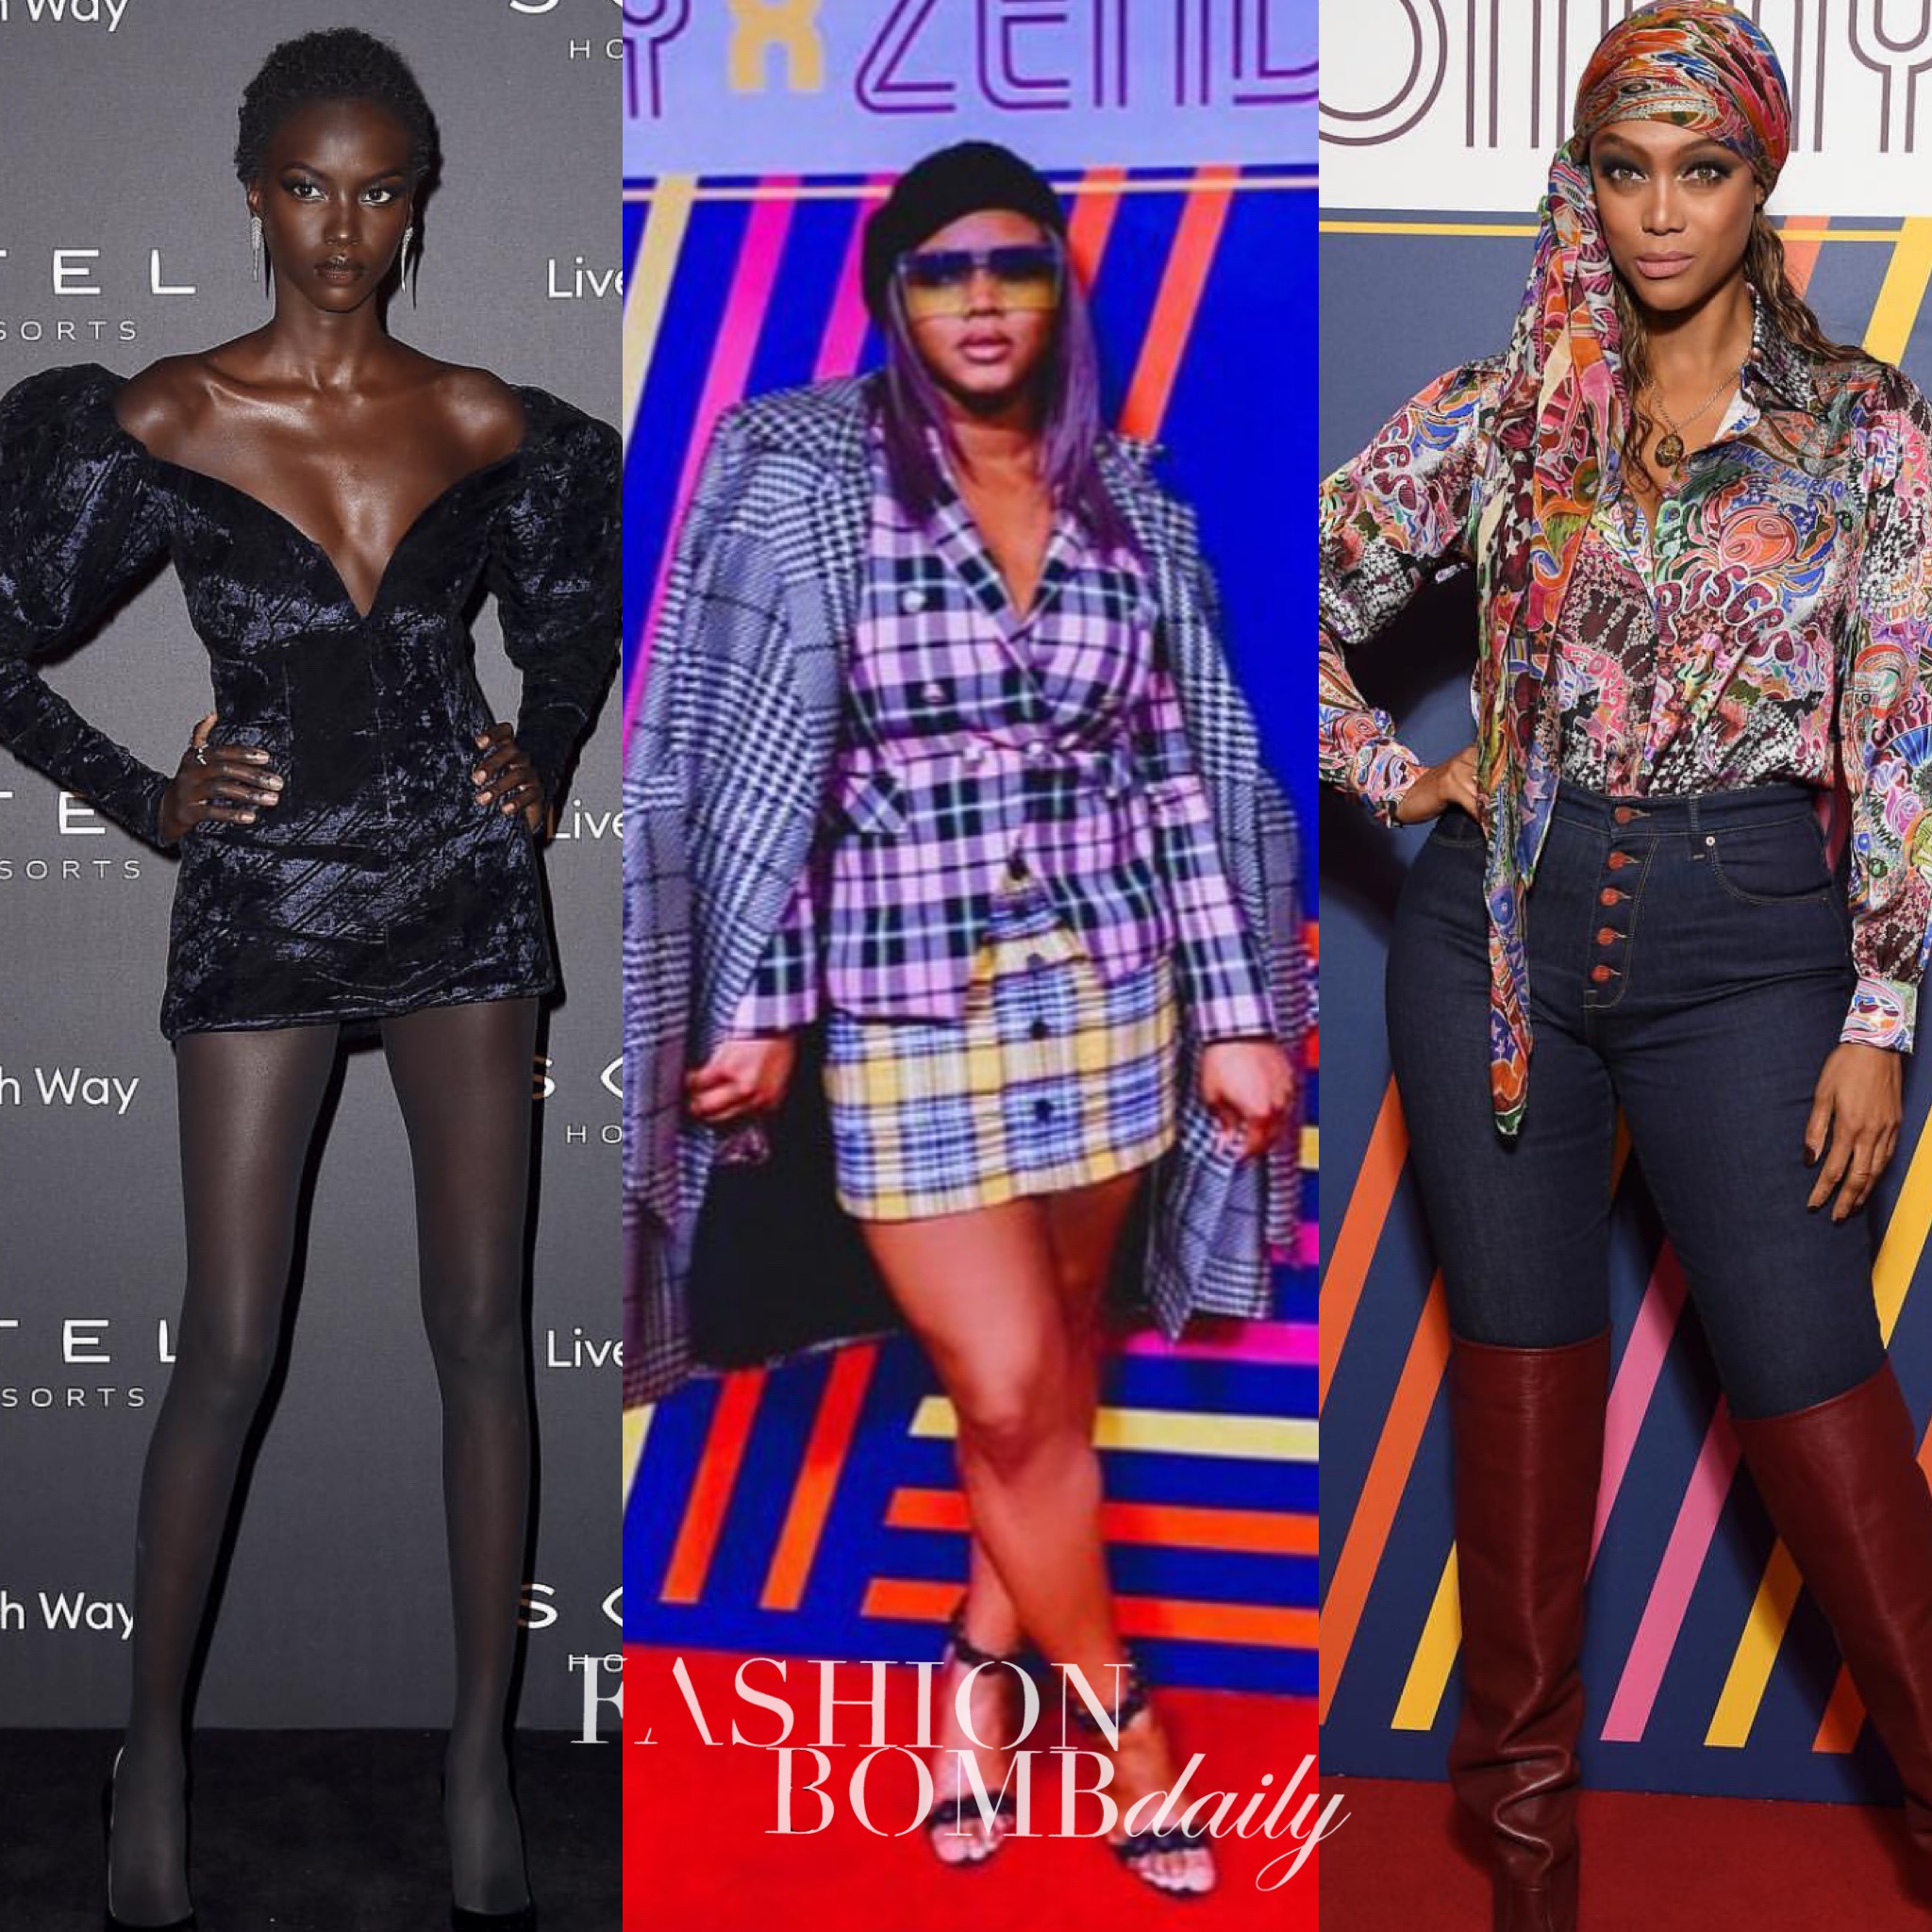 Top_6_Looks_of_the_Day_3:2:19_Anok_Yai_in_LaQuan_Smith_Claire_Sulmers_in_Veronica_Beard_and_Zendaya_x_Tommy_Hilfiger_Celebrity_Style